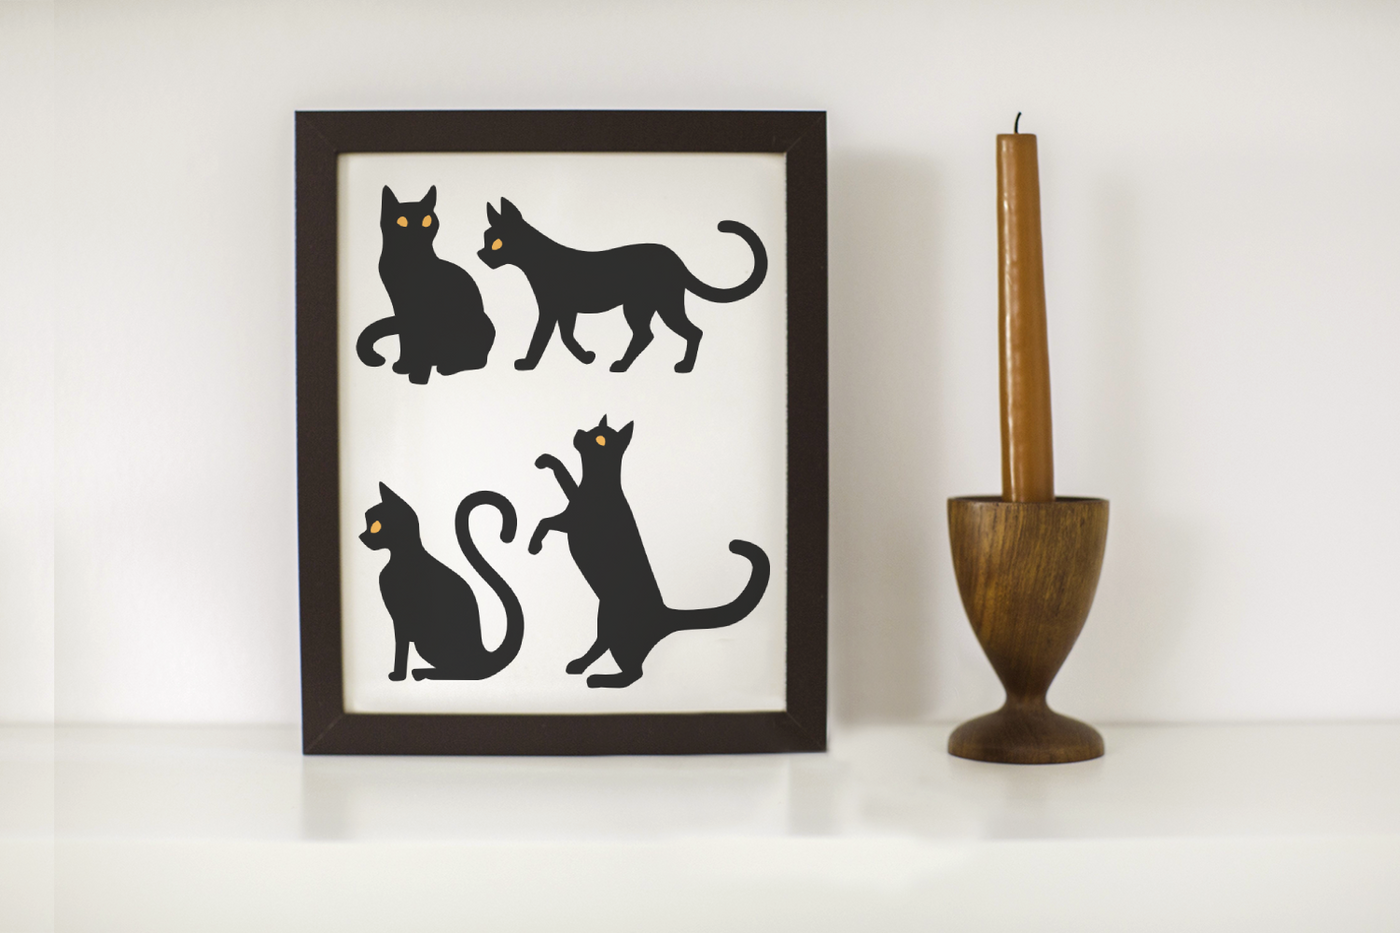 Framed poster of 4 minimal cat silhouettes with yellow eyes